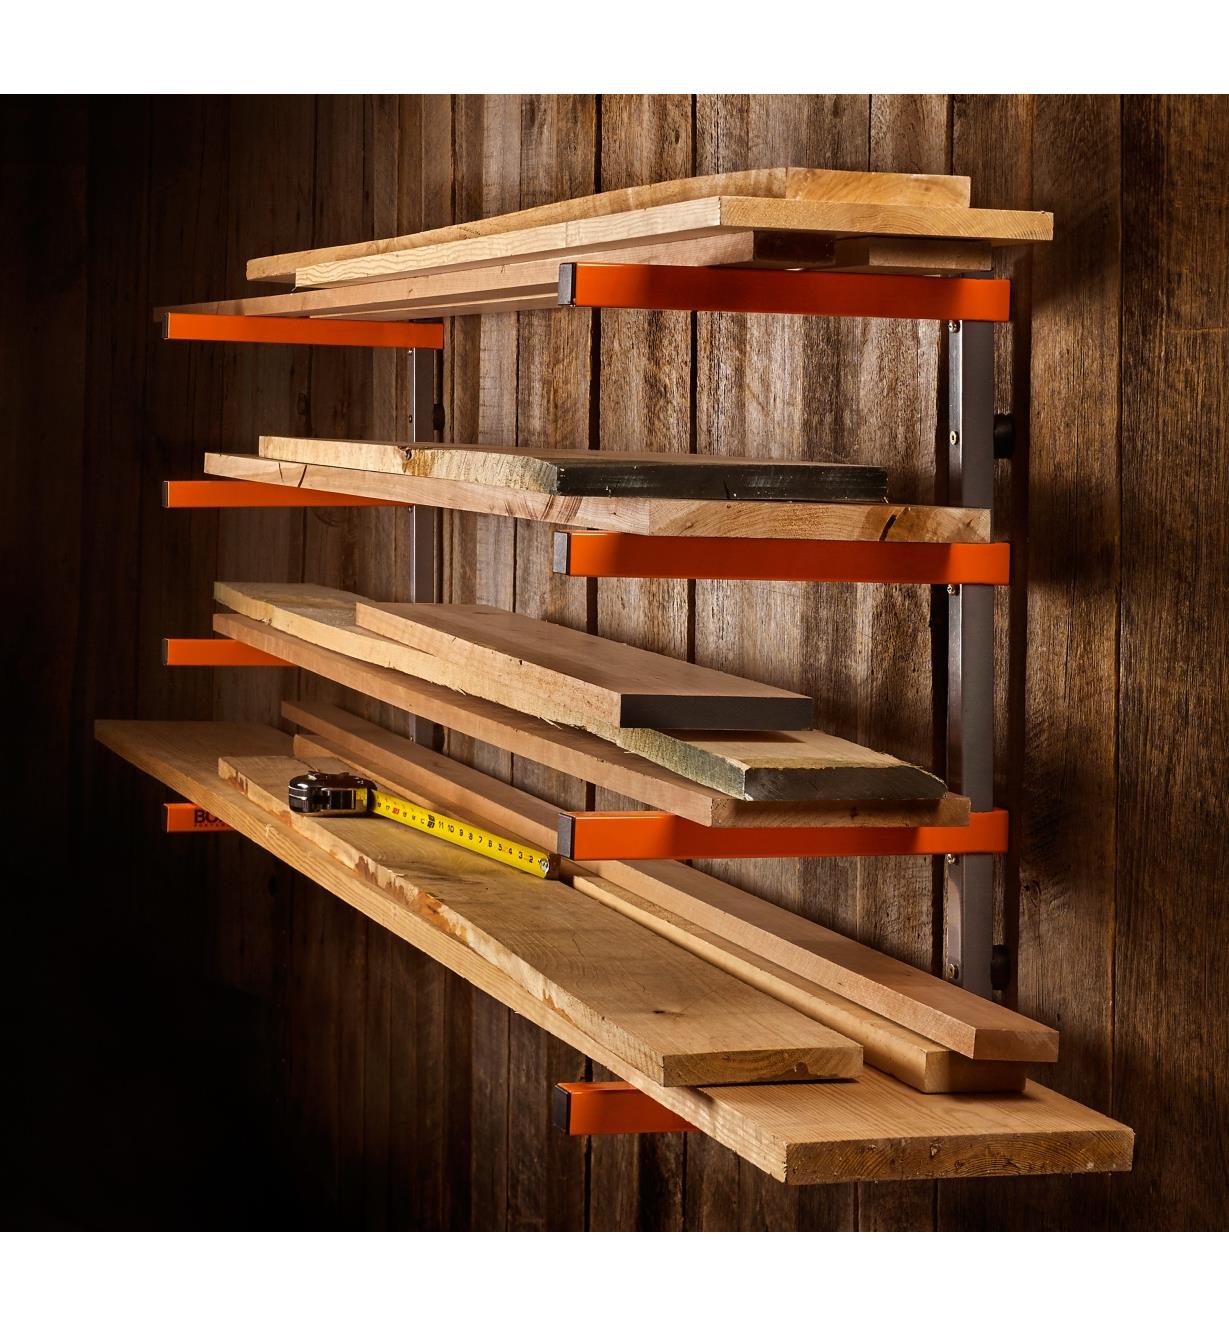 Various sizes of wooden boards stacked on a Bora four-shelf lumber rack mounted on a barnboard wall